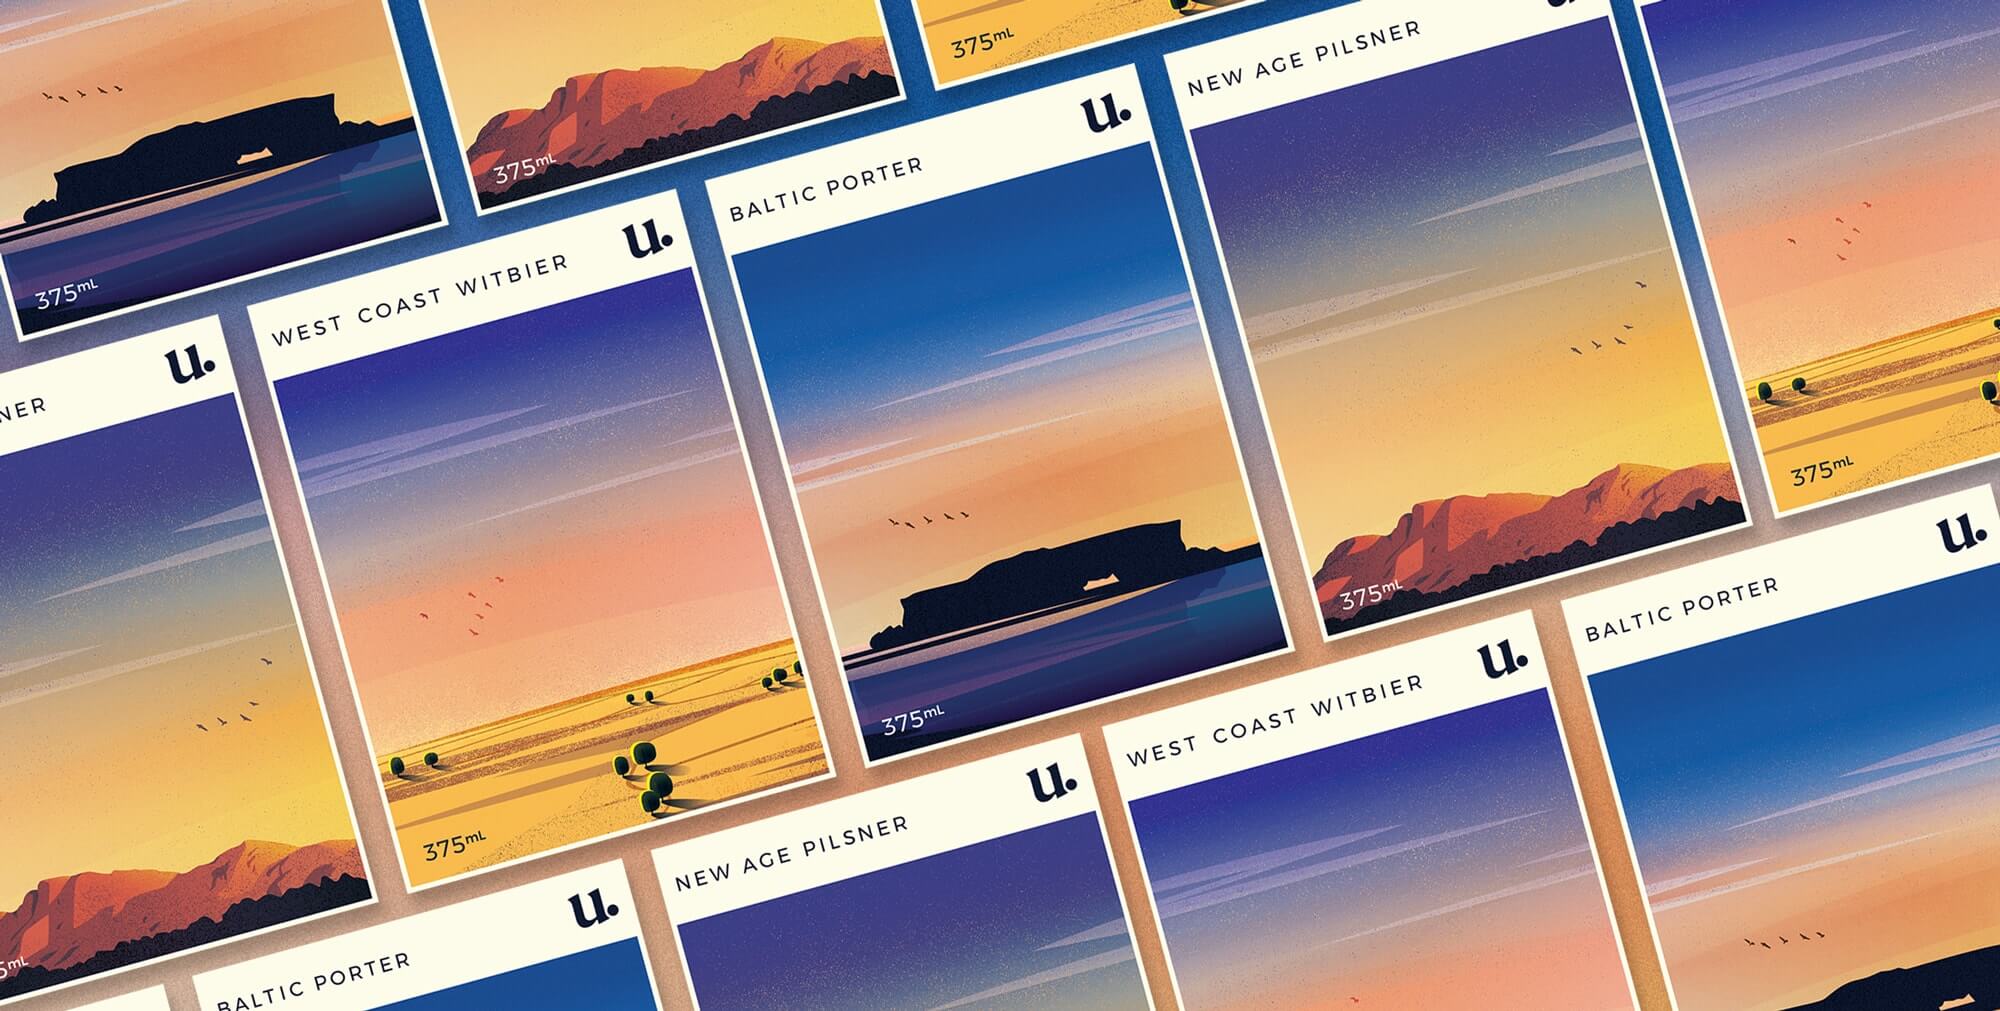 A grid of labels for a Perth craft brewery showcasing branding and colourful illustrations of Western Australian landscapes.